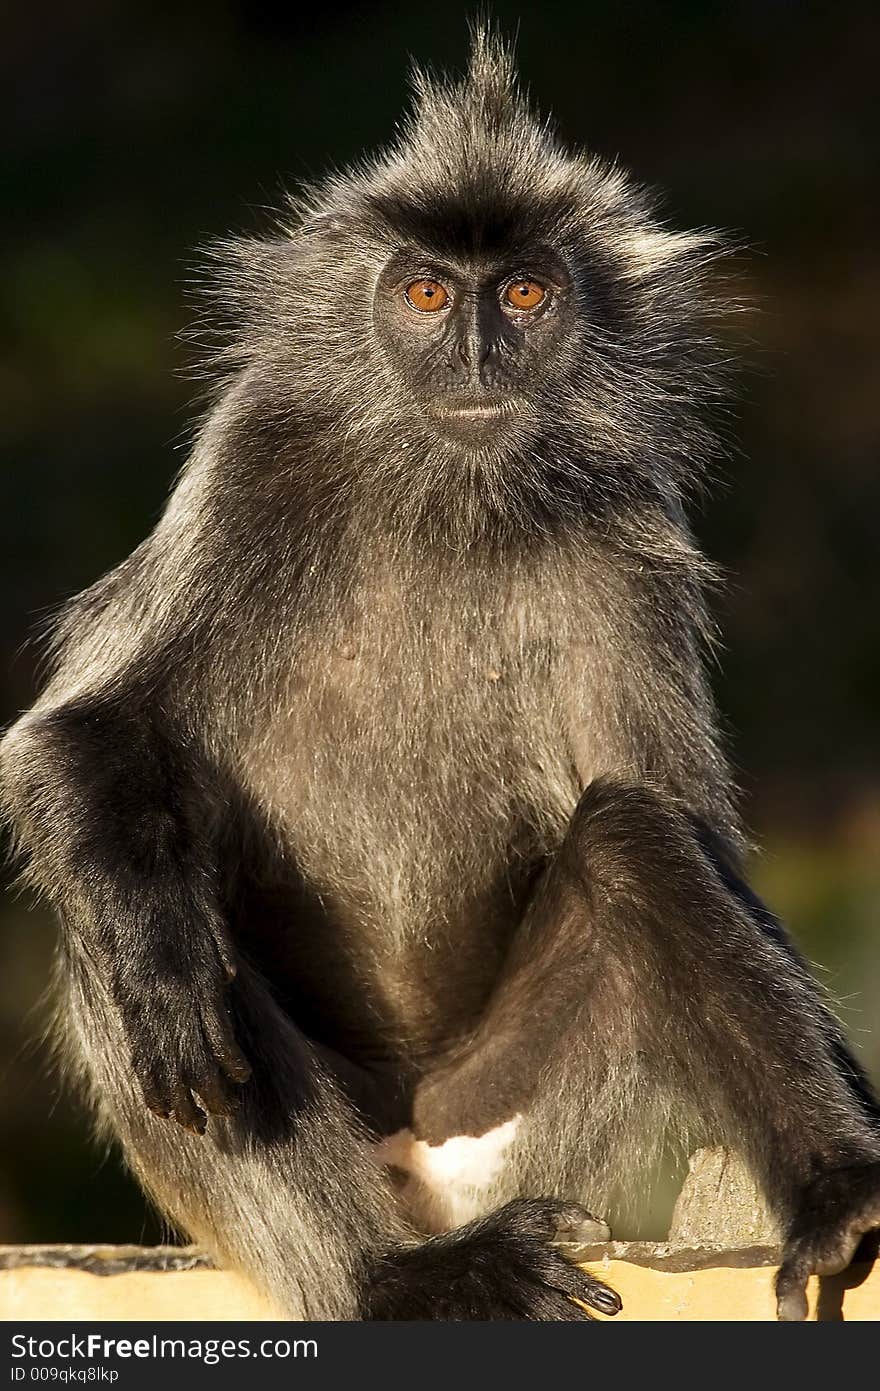 An unknown species of monkey staring to the camera.